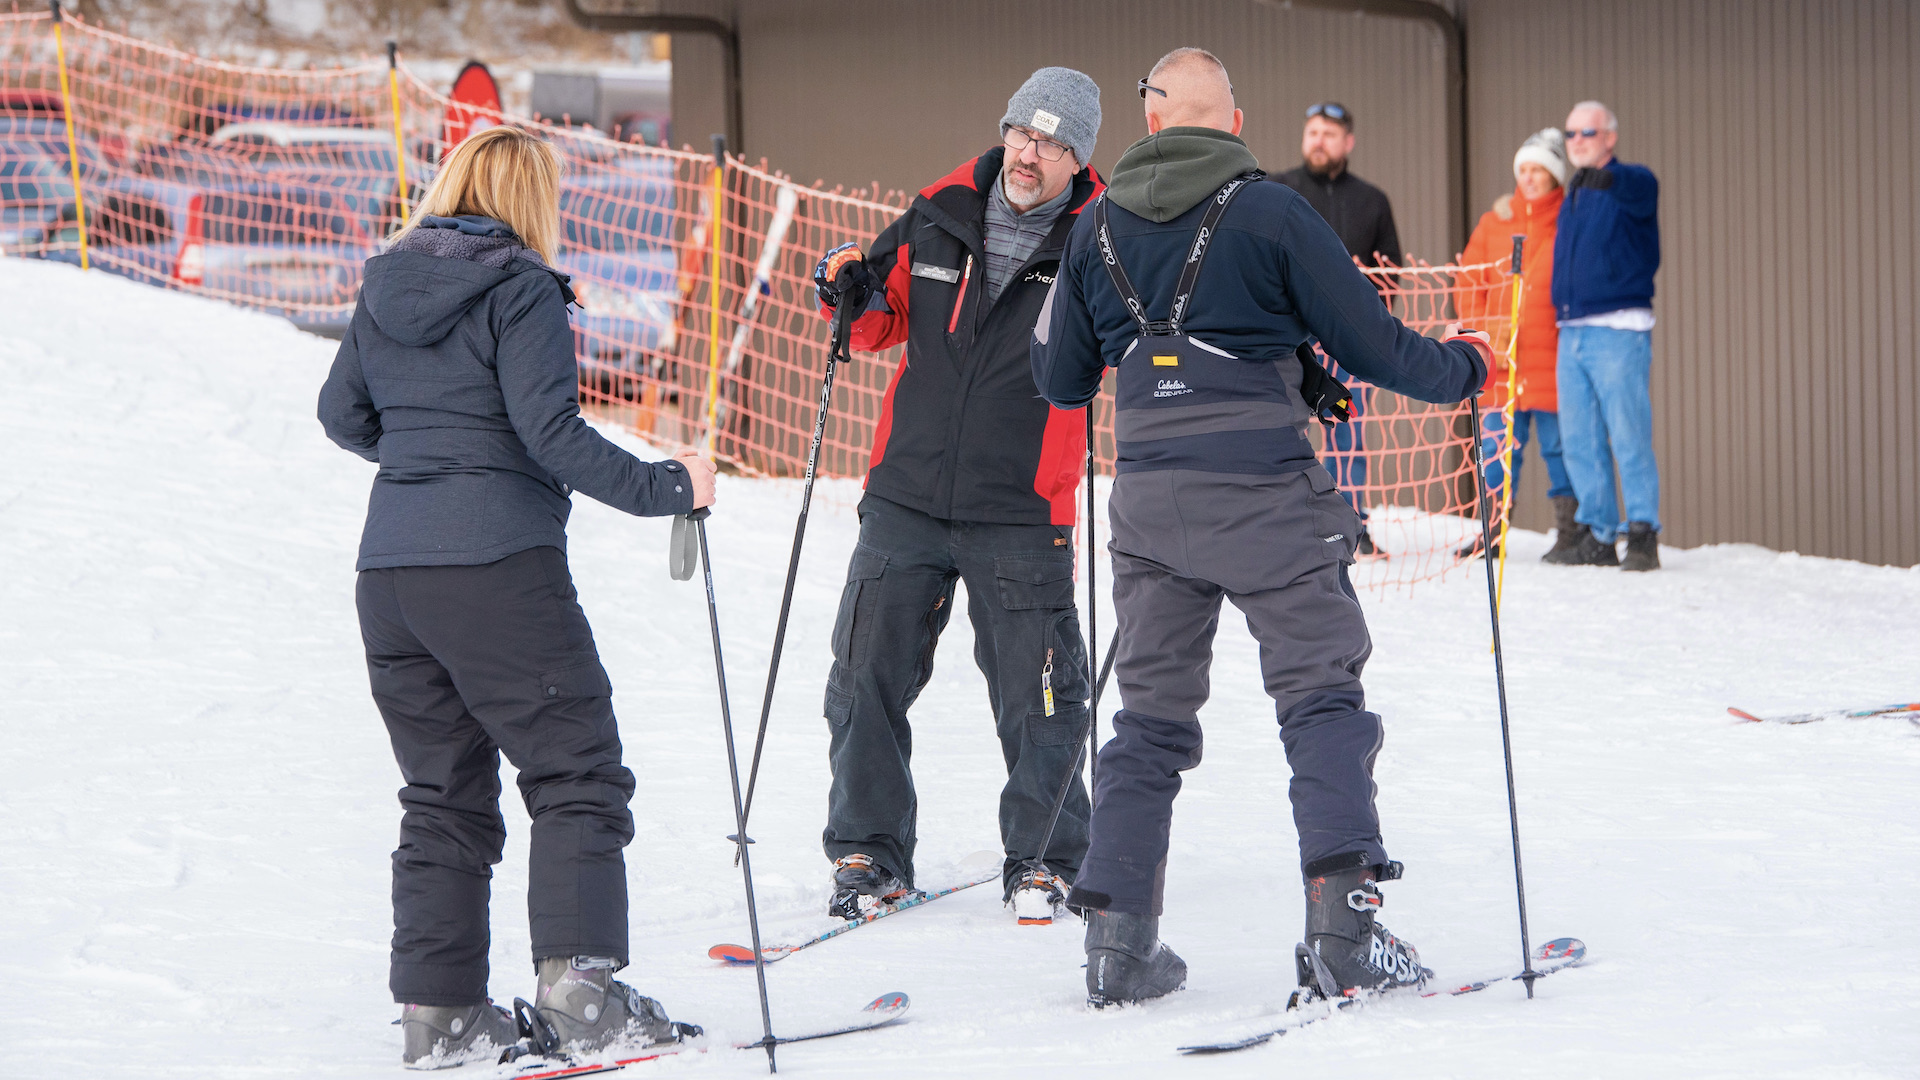 Become A Ski Instructor This Season